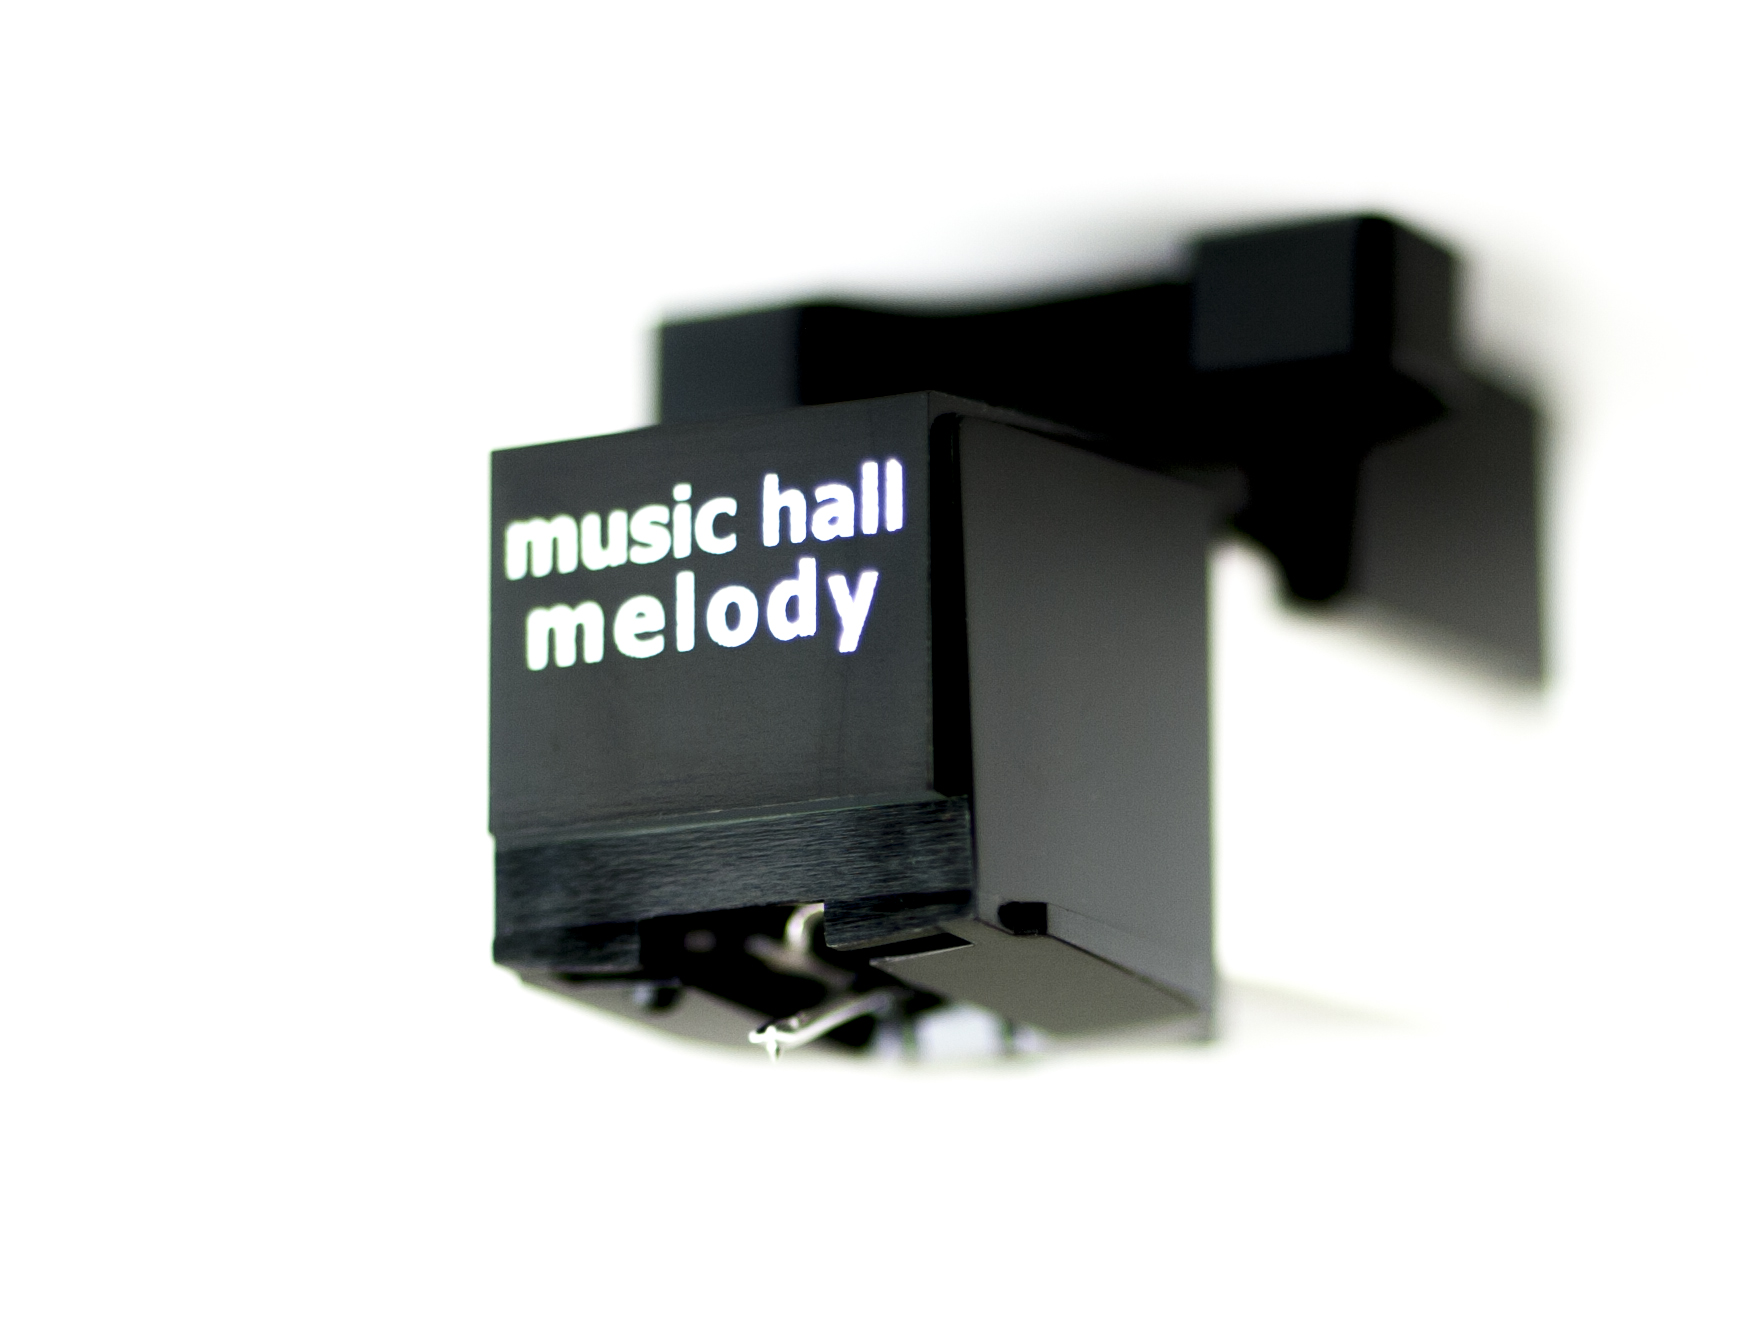 Melody cartridge packed